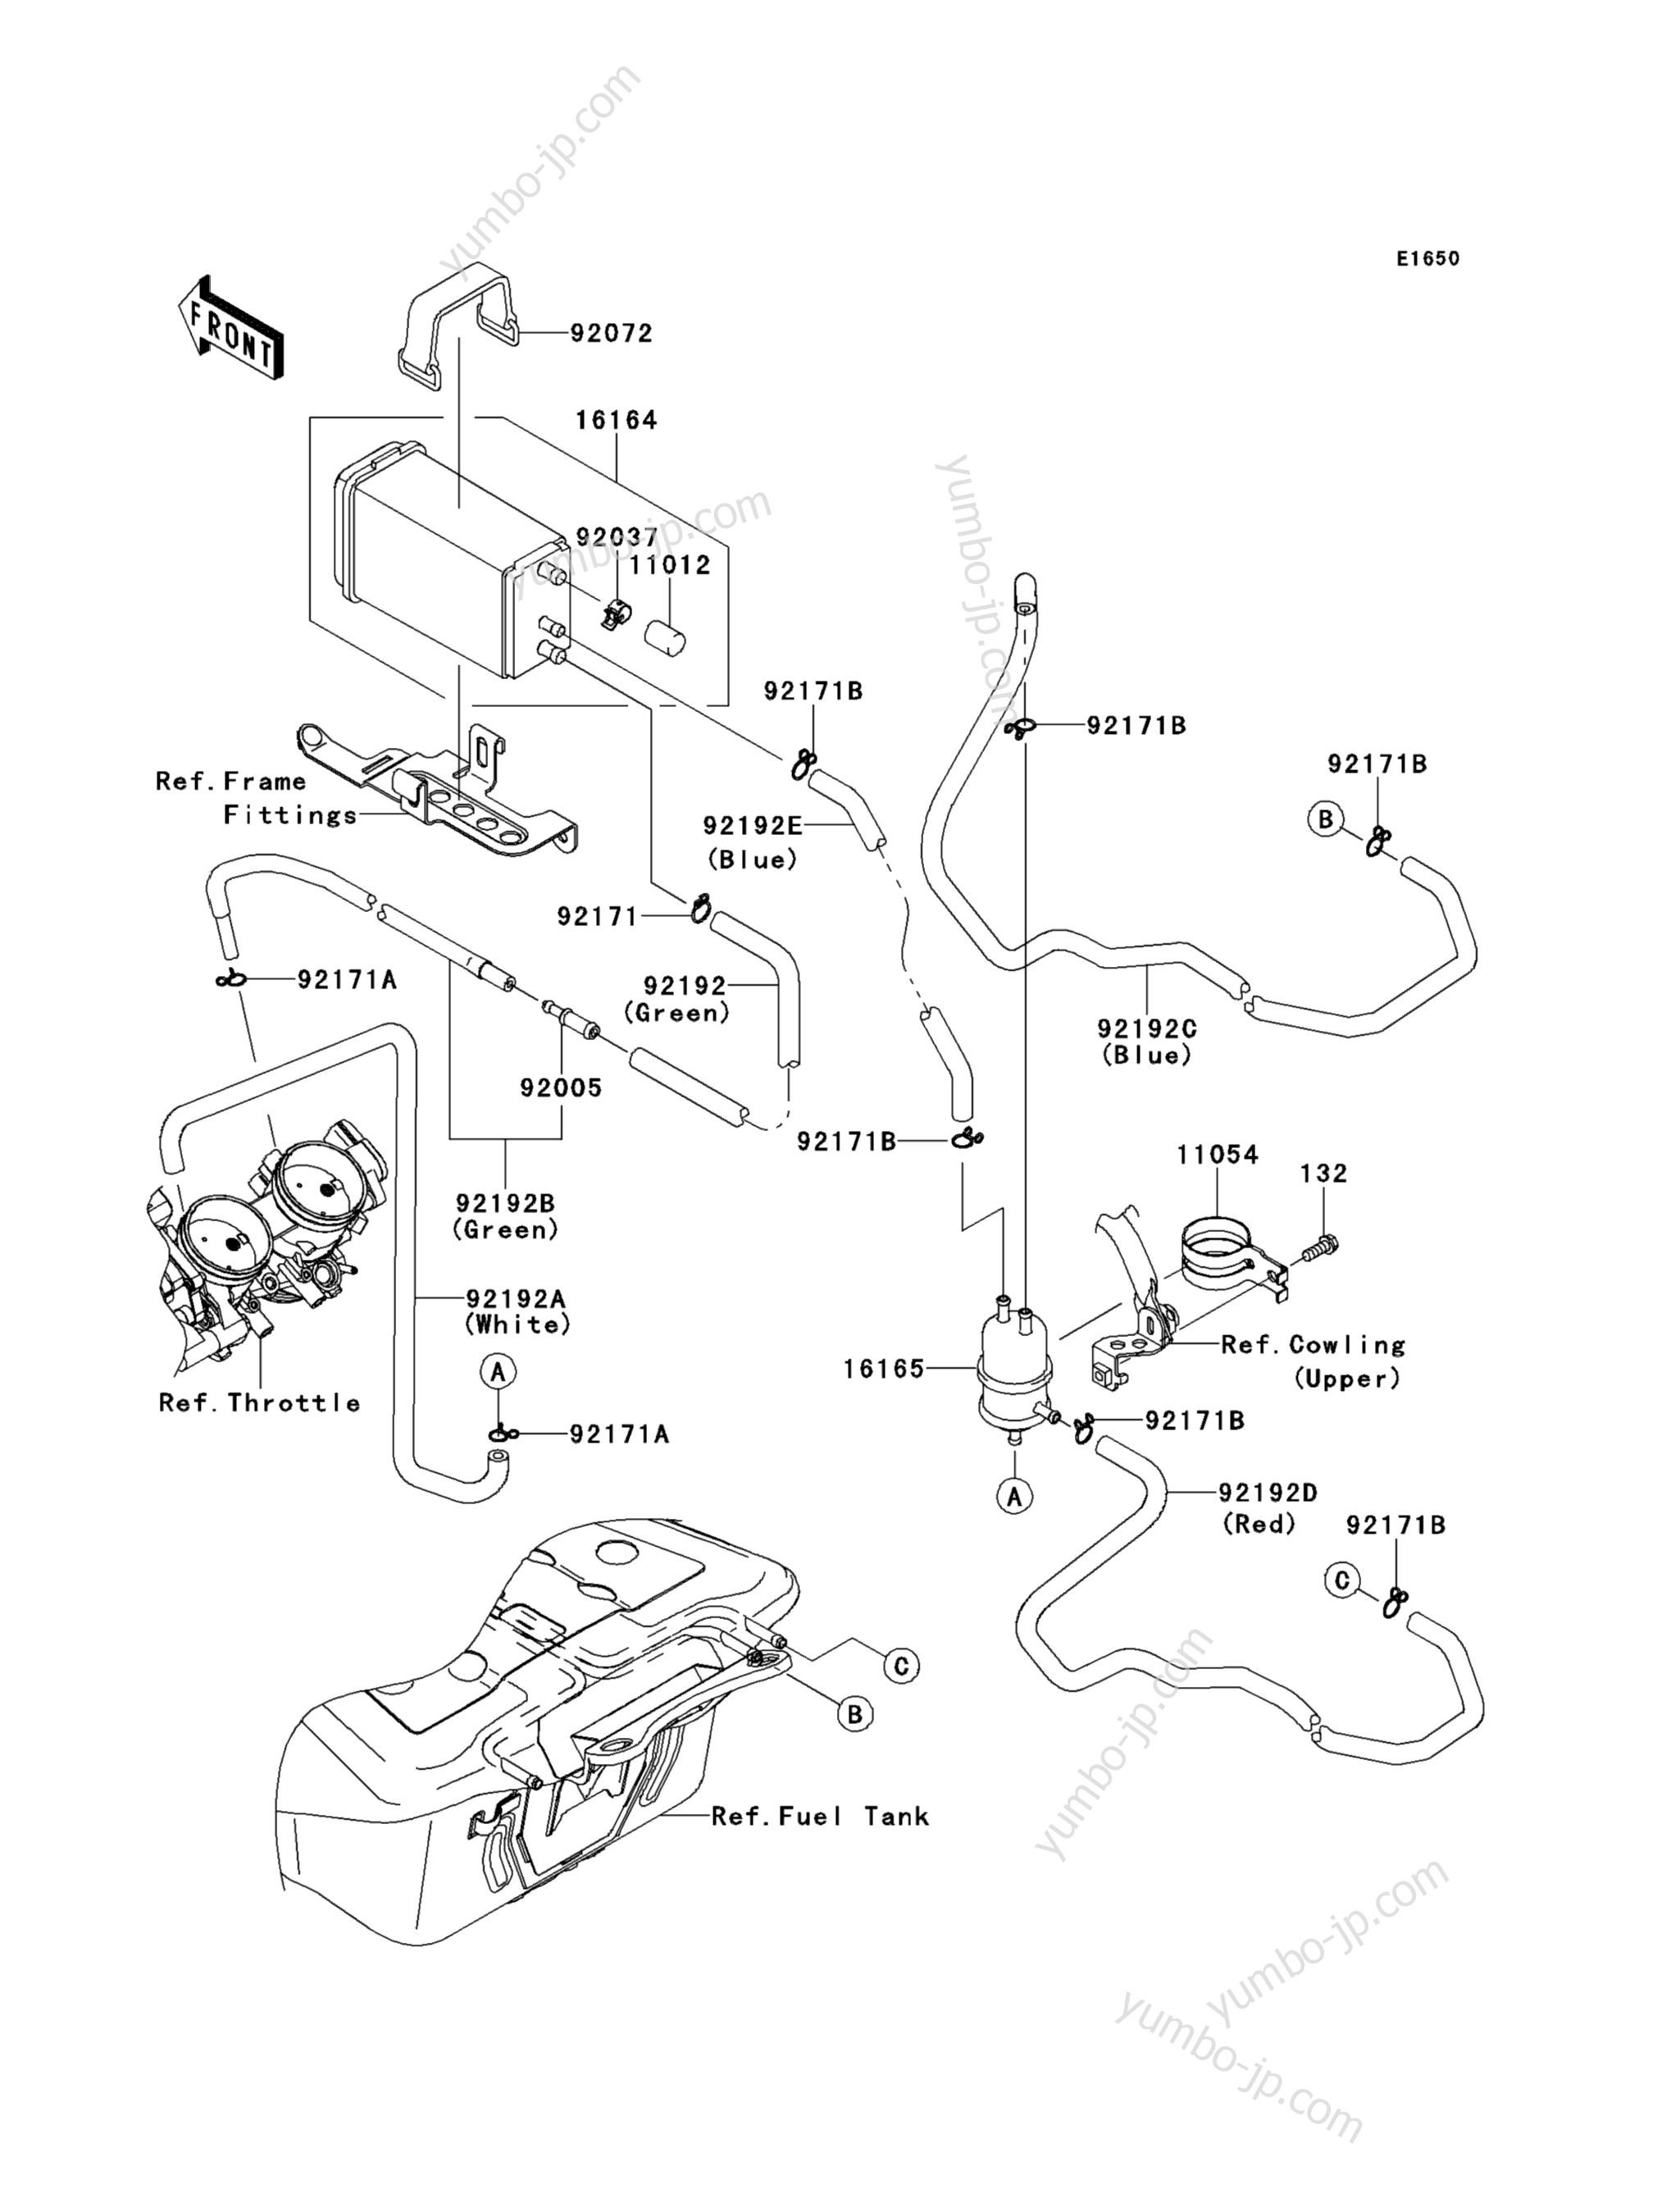 Fuel Evaporative System(CA) for motorcycles KAWASAKI CONCOURS 14 ABS (ZG1400CBF) 2011 year